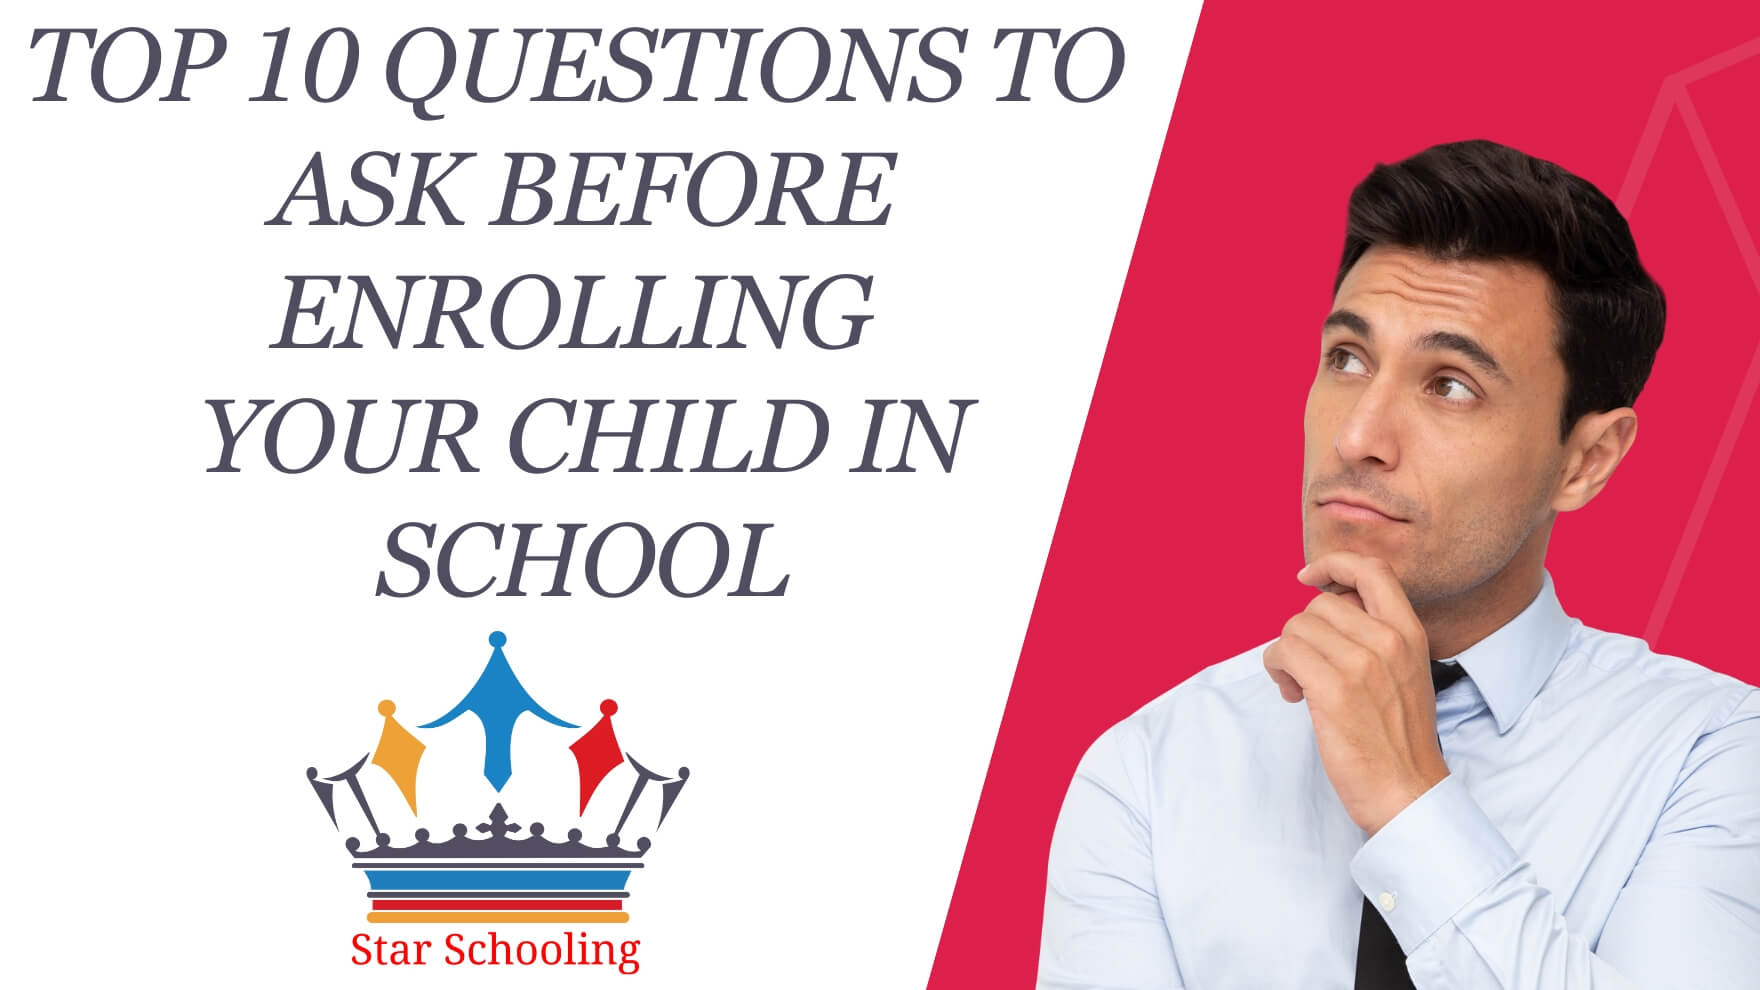 Top 10 questions to ask before enrolling your child in school